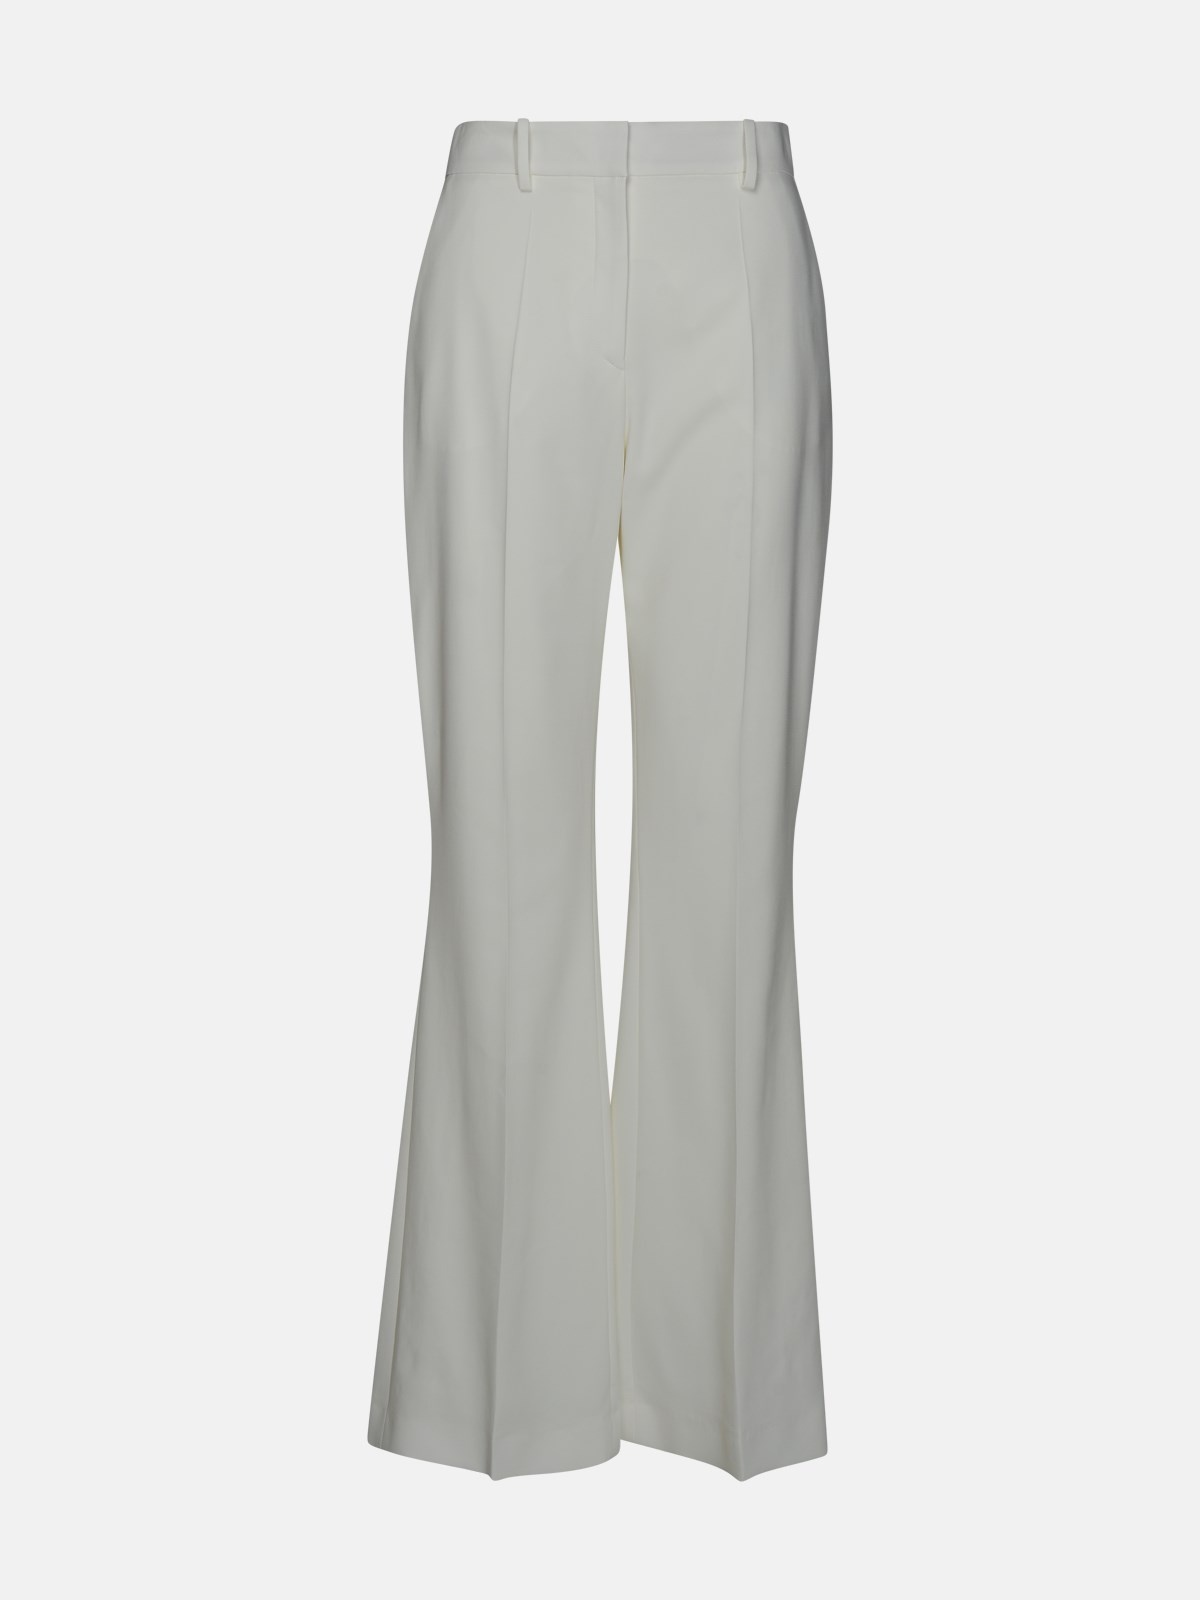 WHITE VISCOSE BLEND TROUSERS - 1